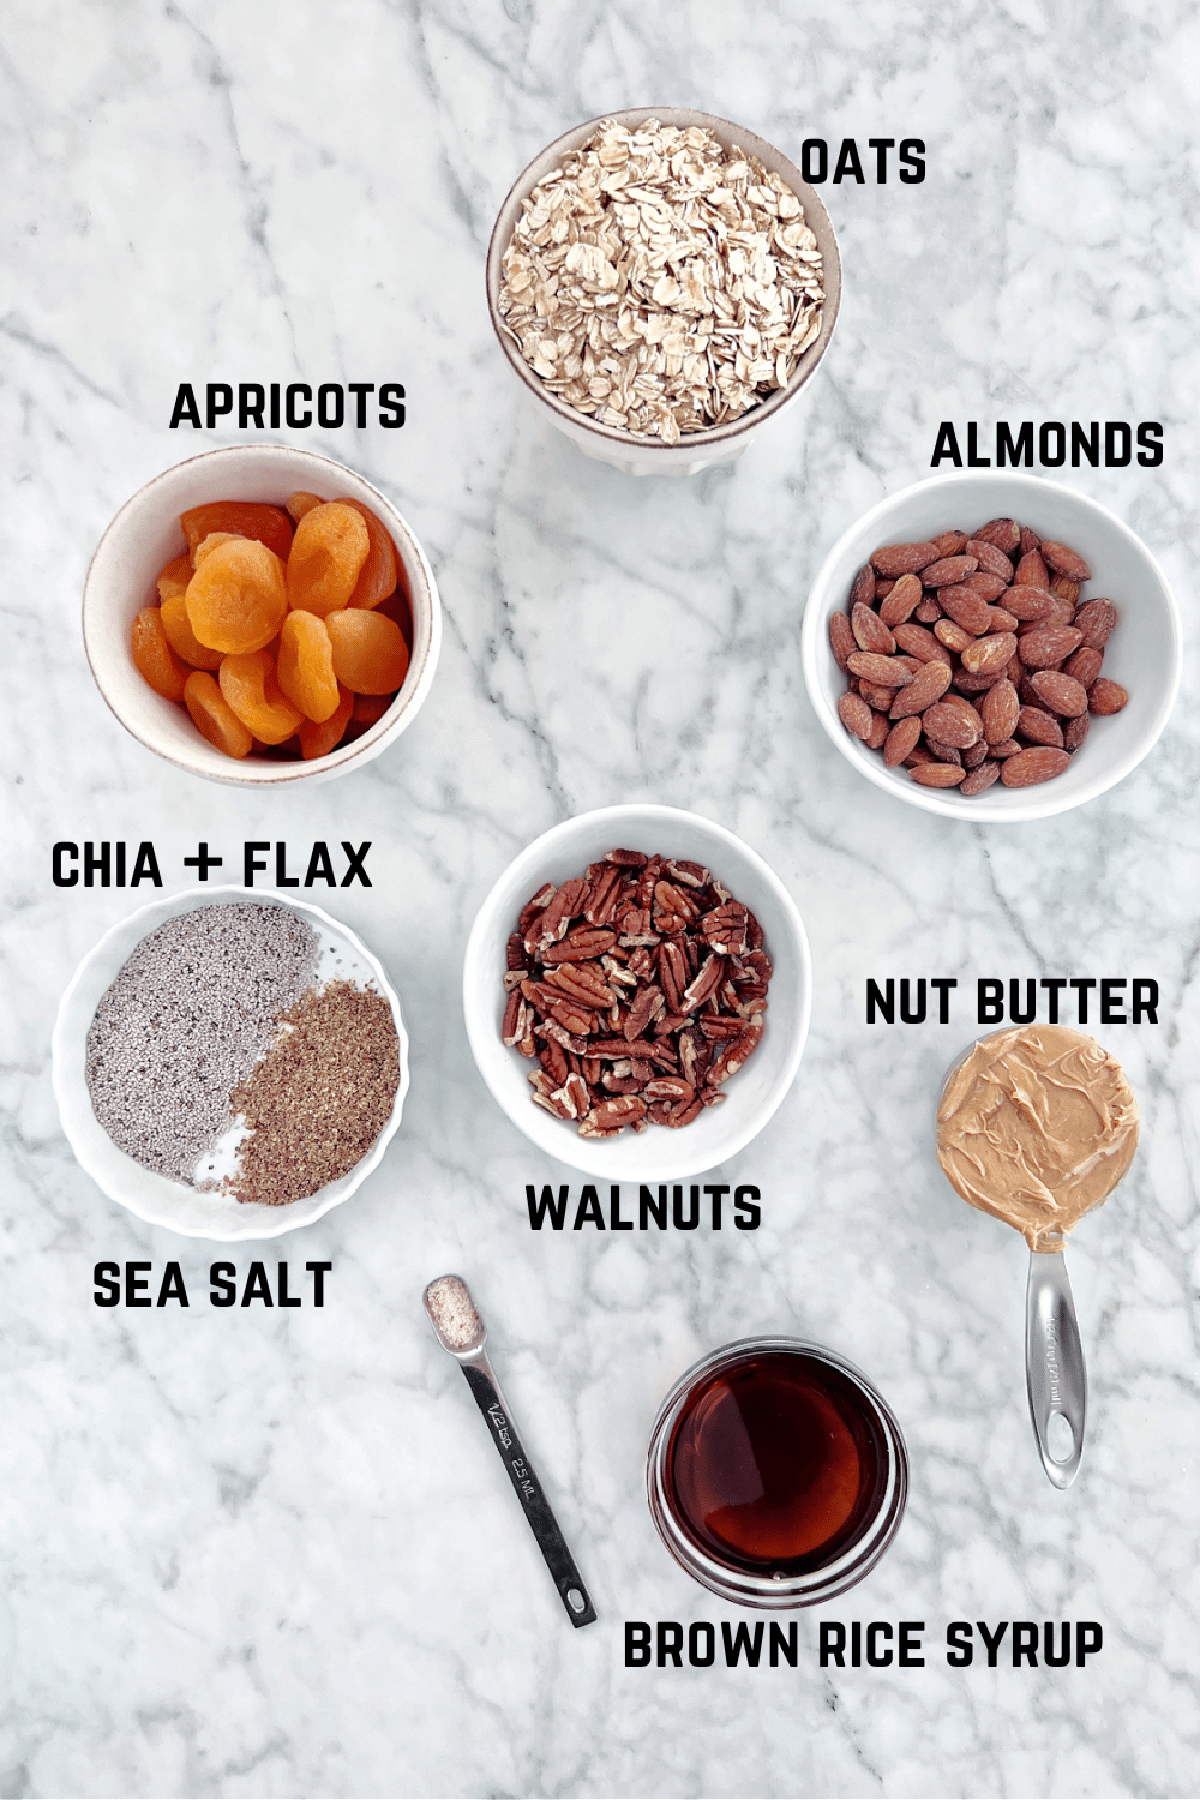 Overhead view of ingredients to make granola bars: oats, dried apricots, almonds, walnuts, nut butter, brown rice syrup, salt, chia, and flax.